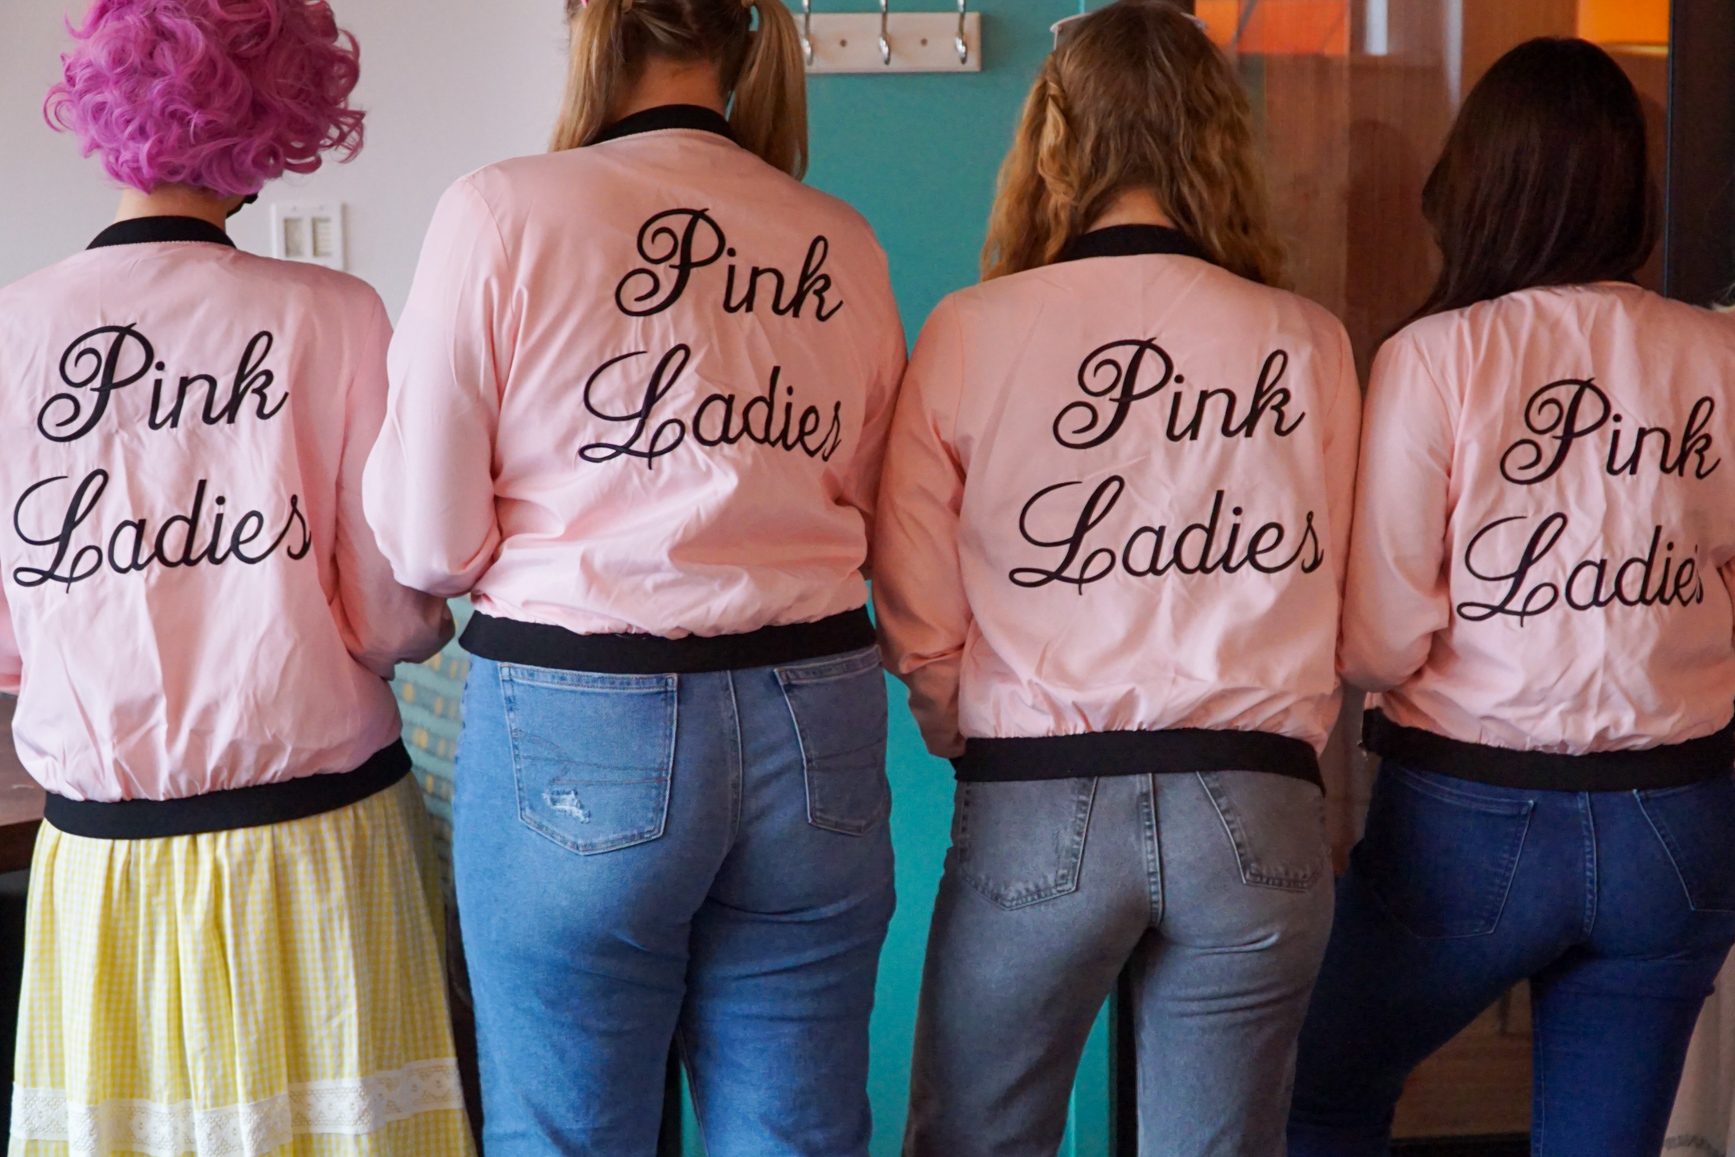 Actresses playing the Pink Ladies took the stage in FYP's "Grease" on Friday